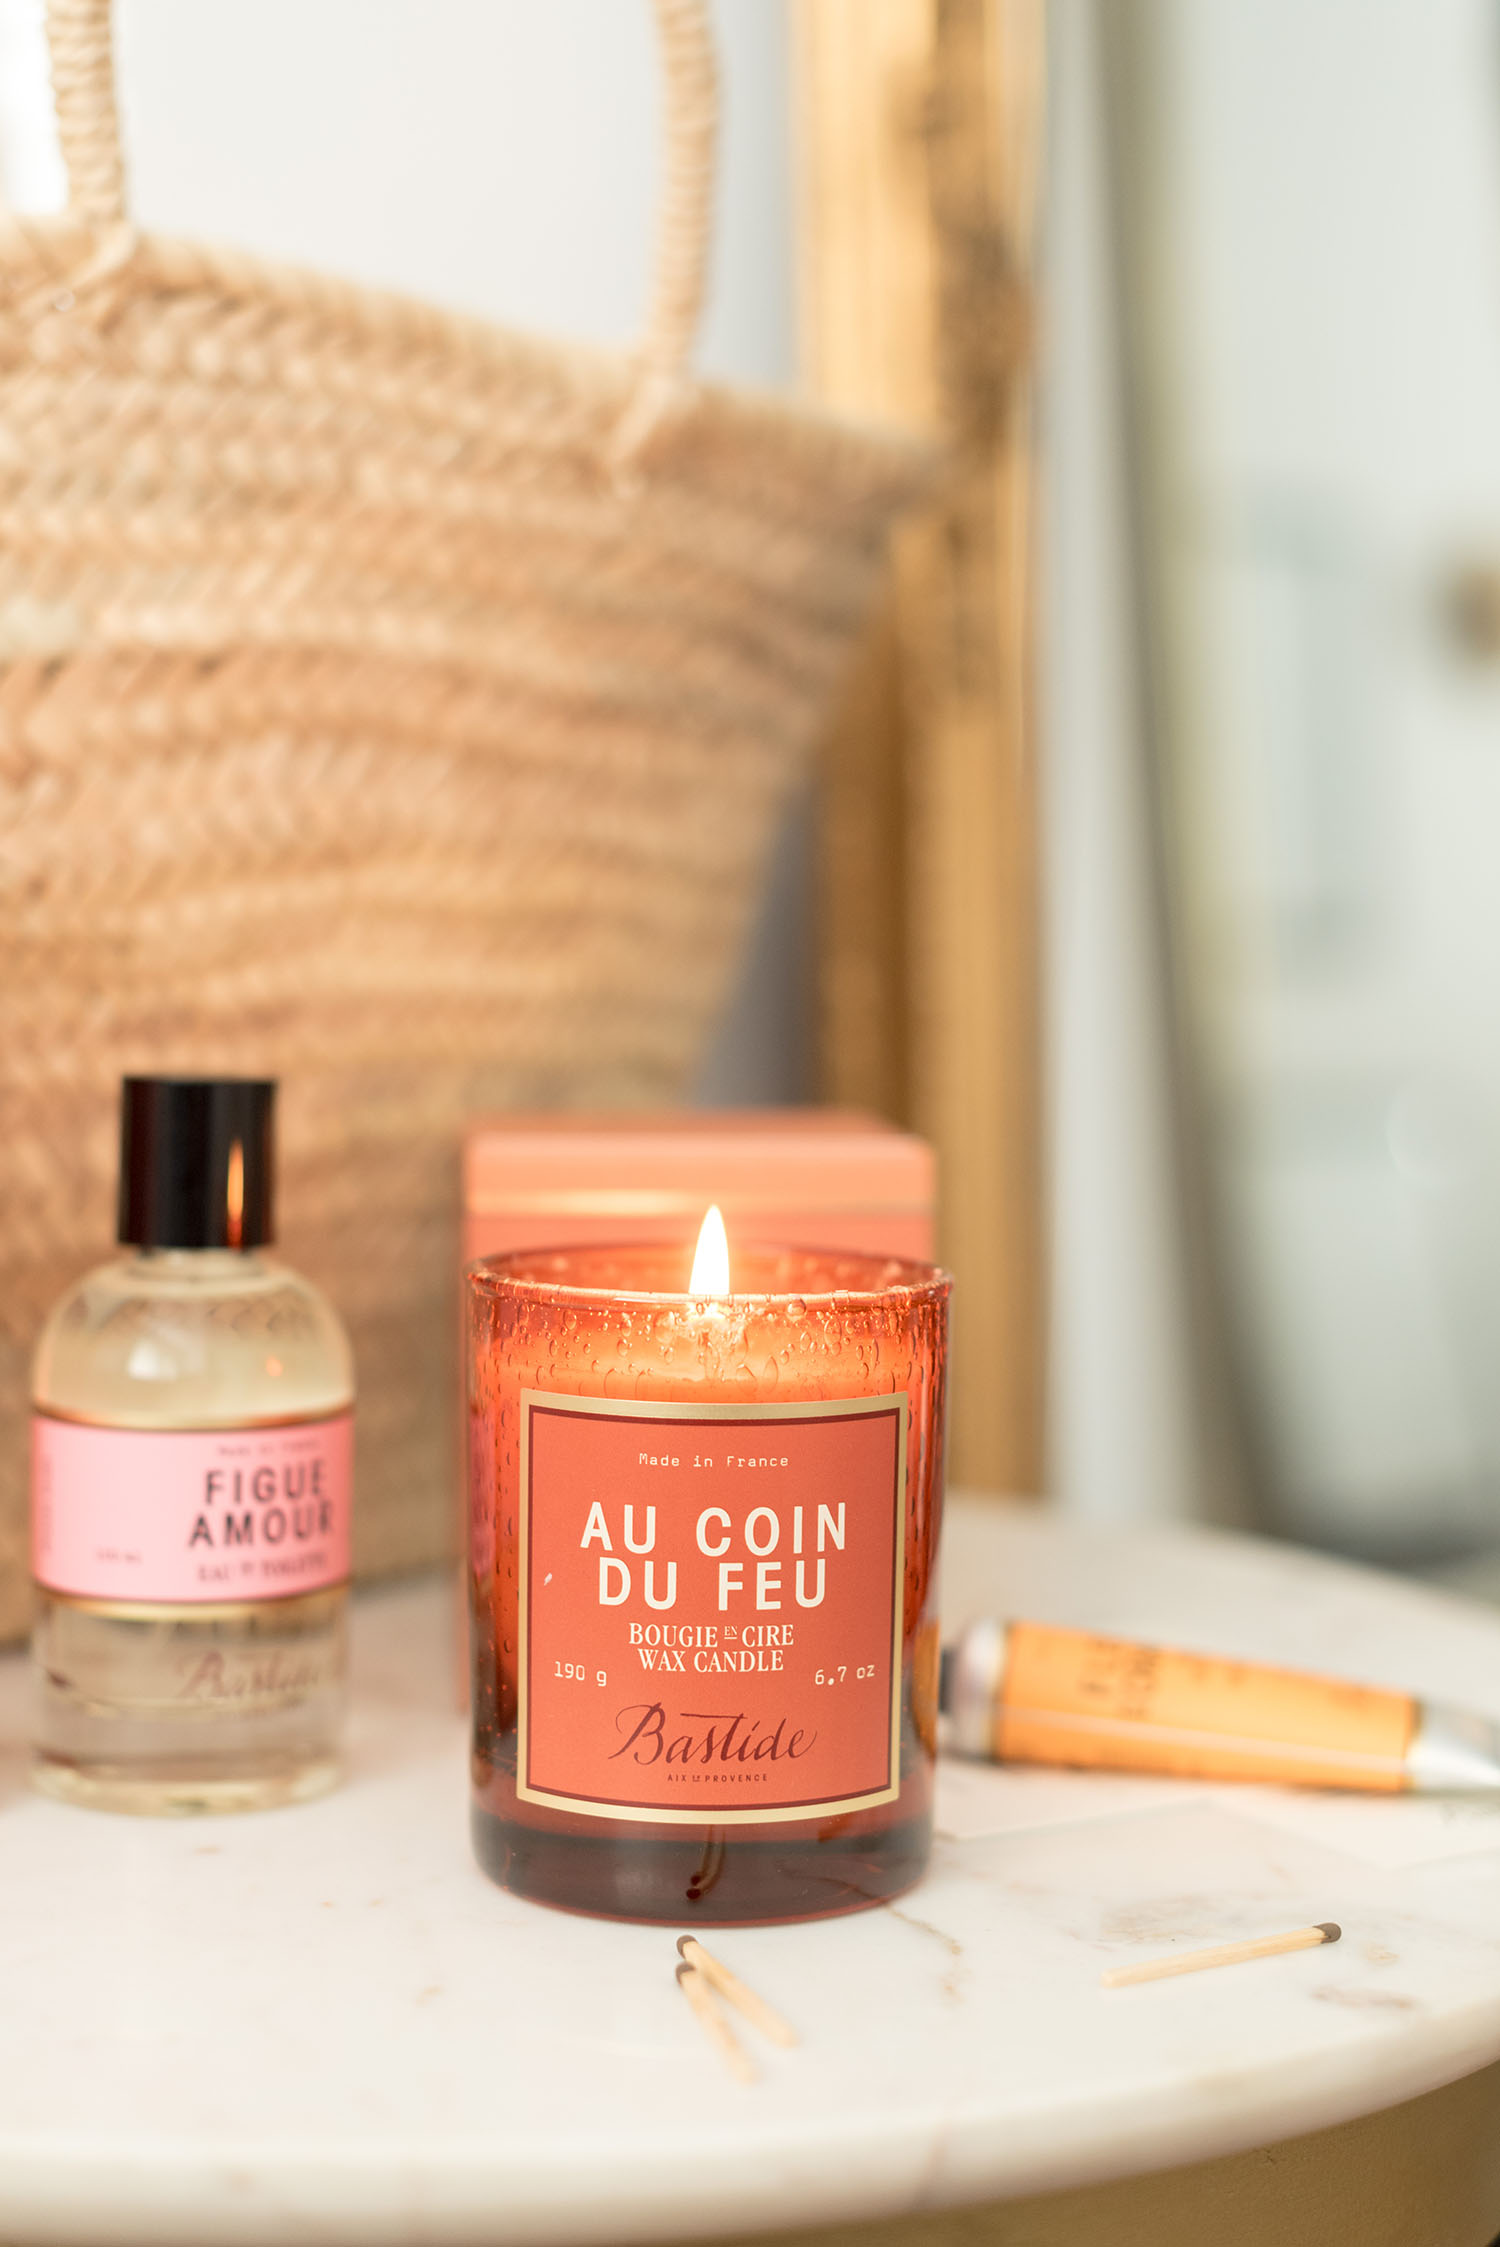 Au Coin du Feu, the newest candle from Bastide, as captured by top Canadian beauty blogger Cee Fardoe of Coco & Vera